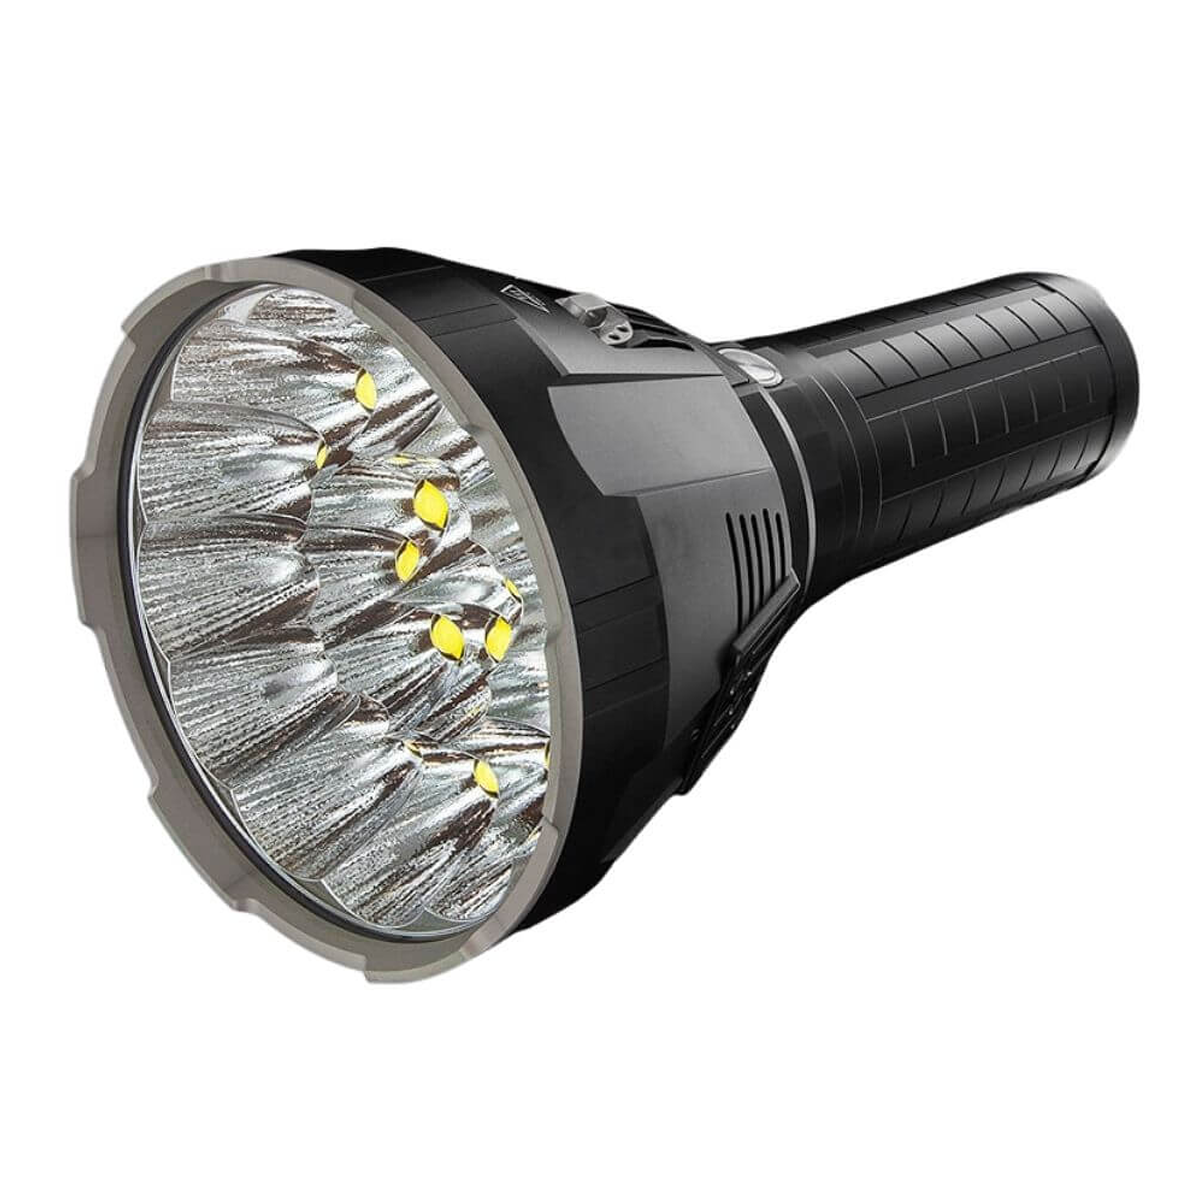 Imalent MS18 100,000 Lumens Brightest Flashlight Camping Search  Rechargeable LED